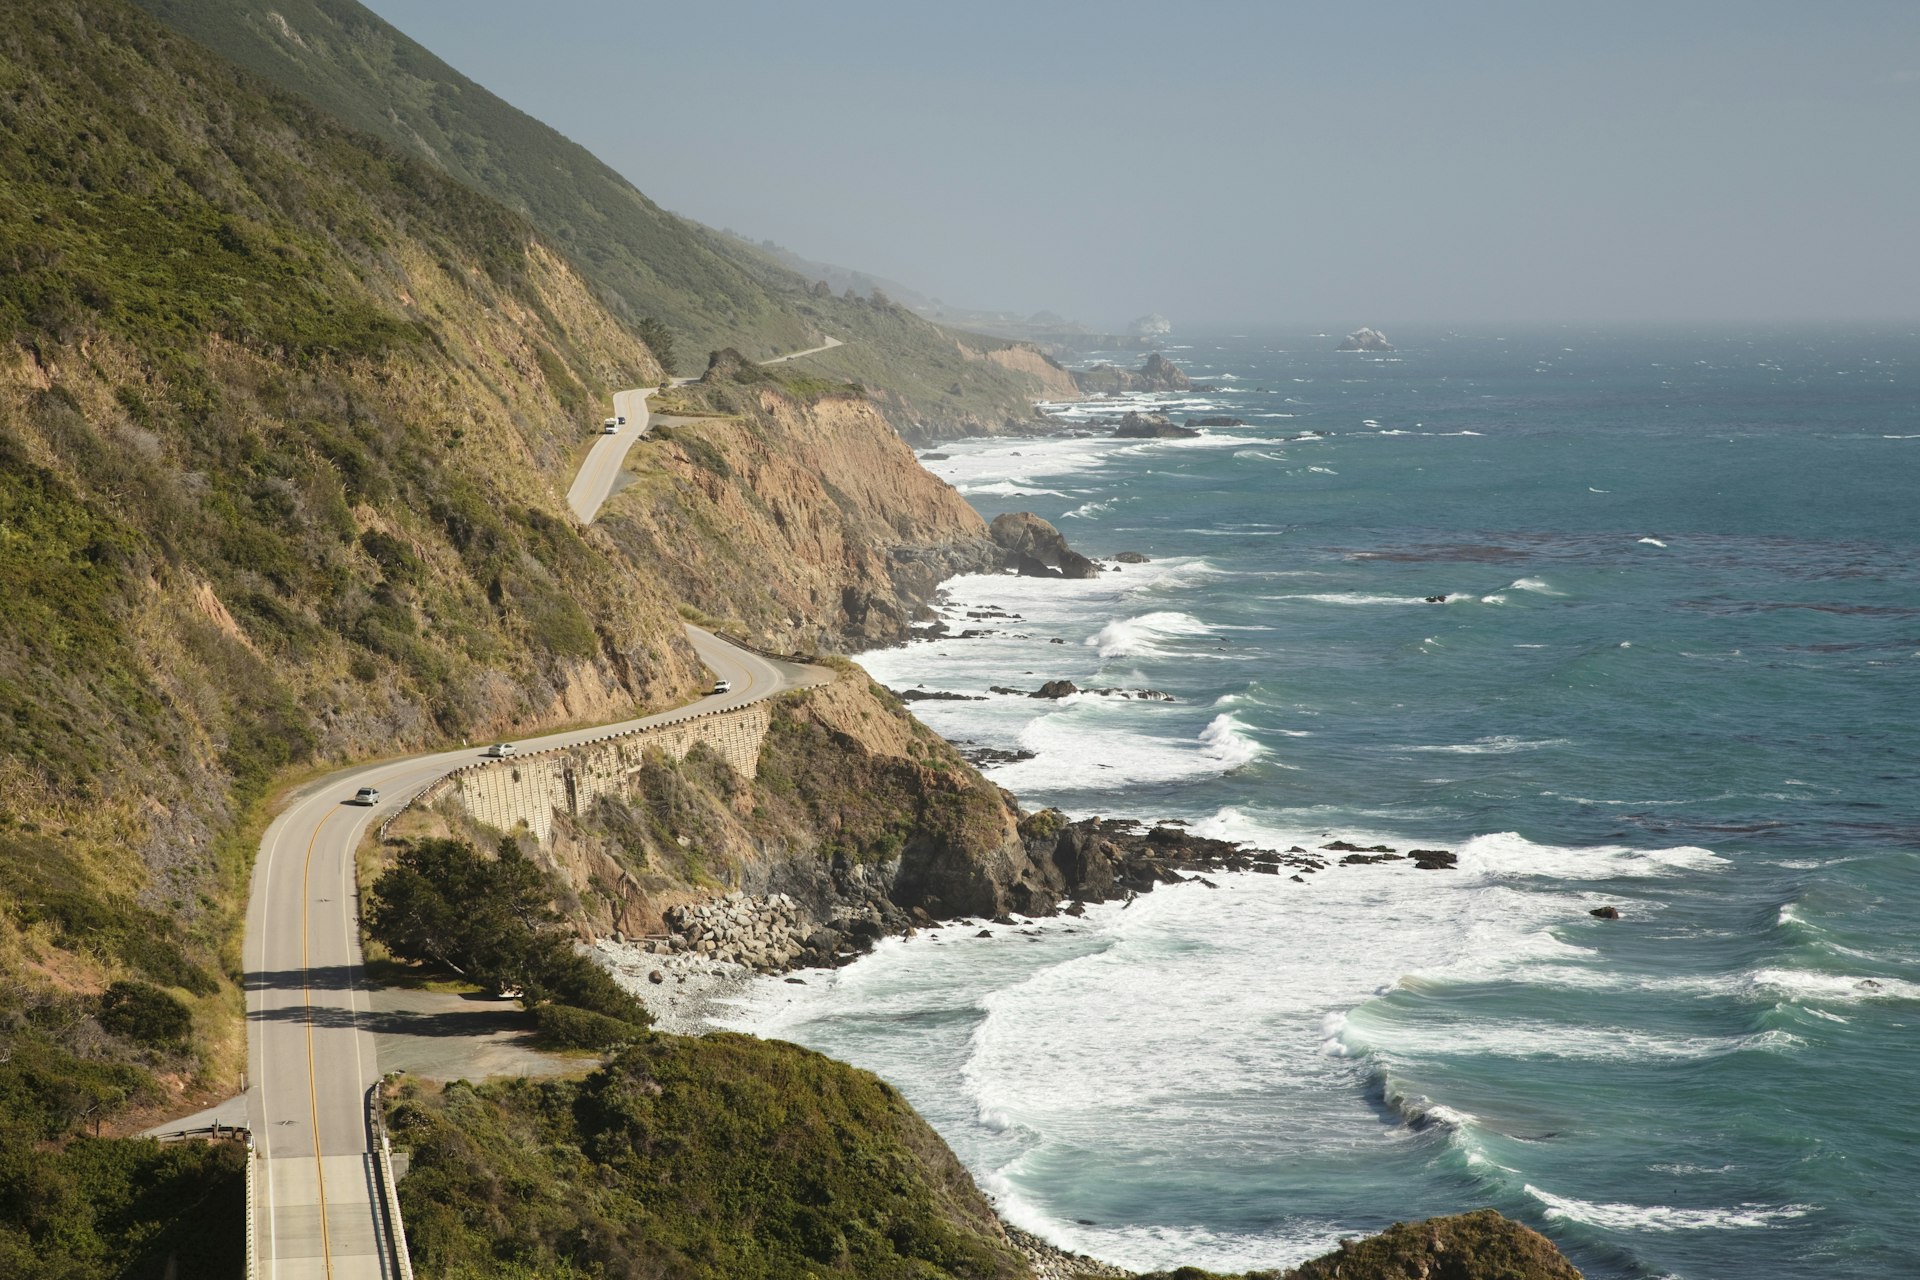 A late afternoon view of Pacific Coast Highway (aka Highway 1) on the Central California coastline in the Big Sur area.